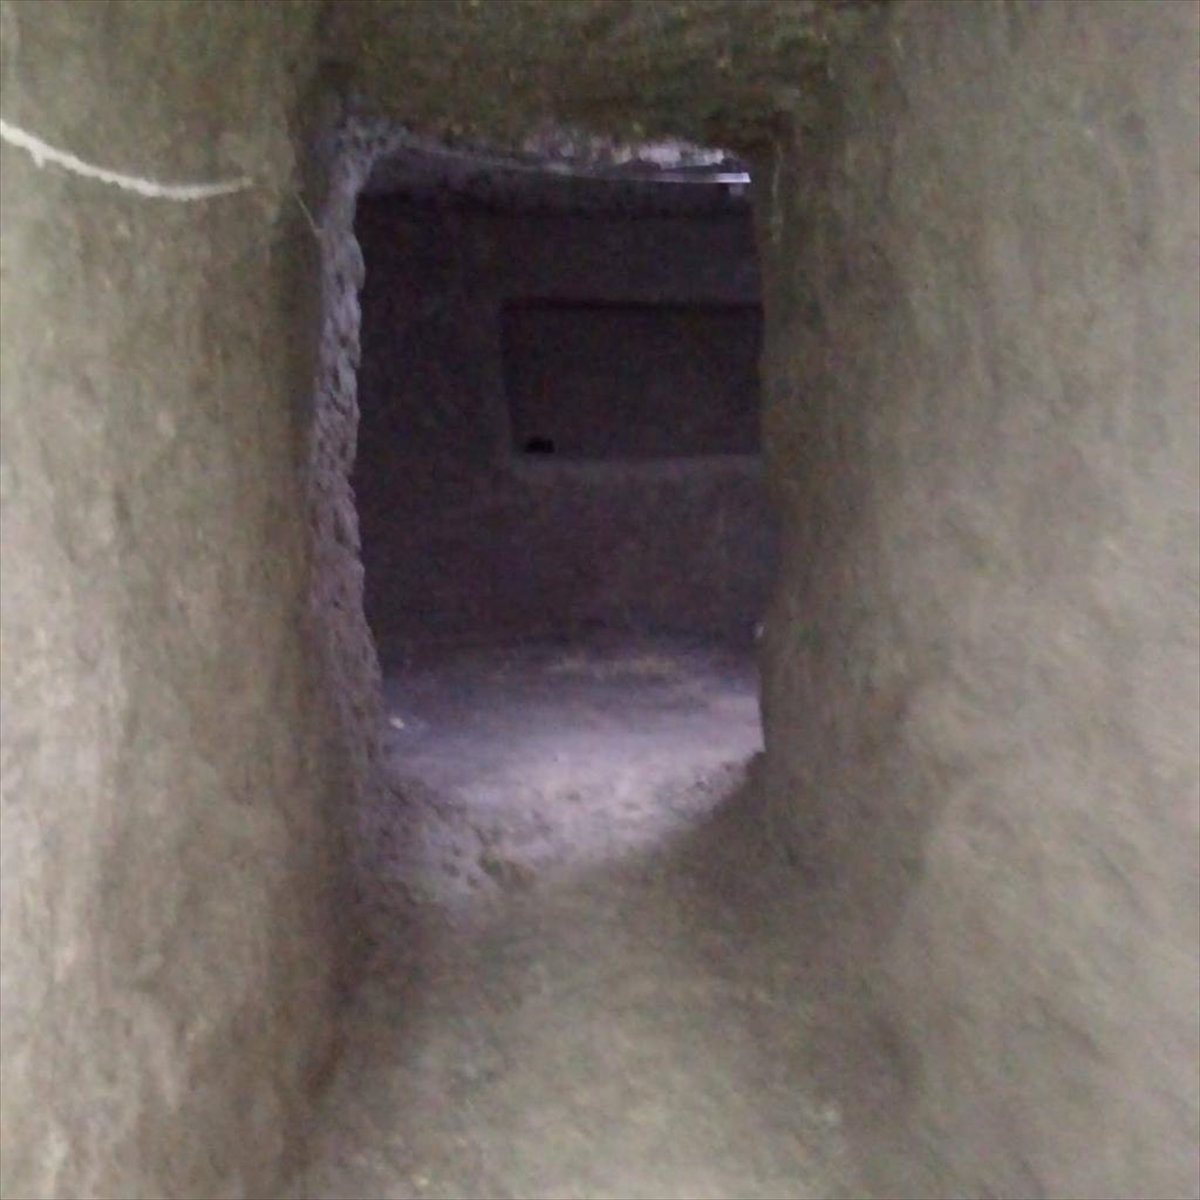 The terrorist organization PKK has the civilians it detained in Syria dig tunnels #3